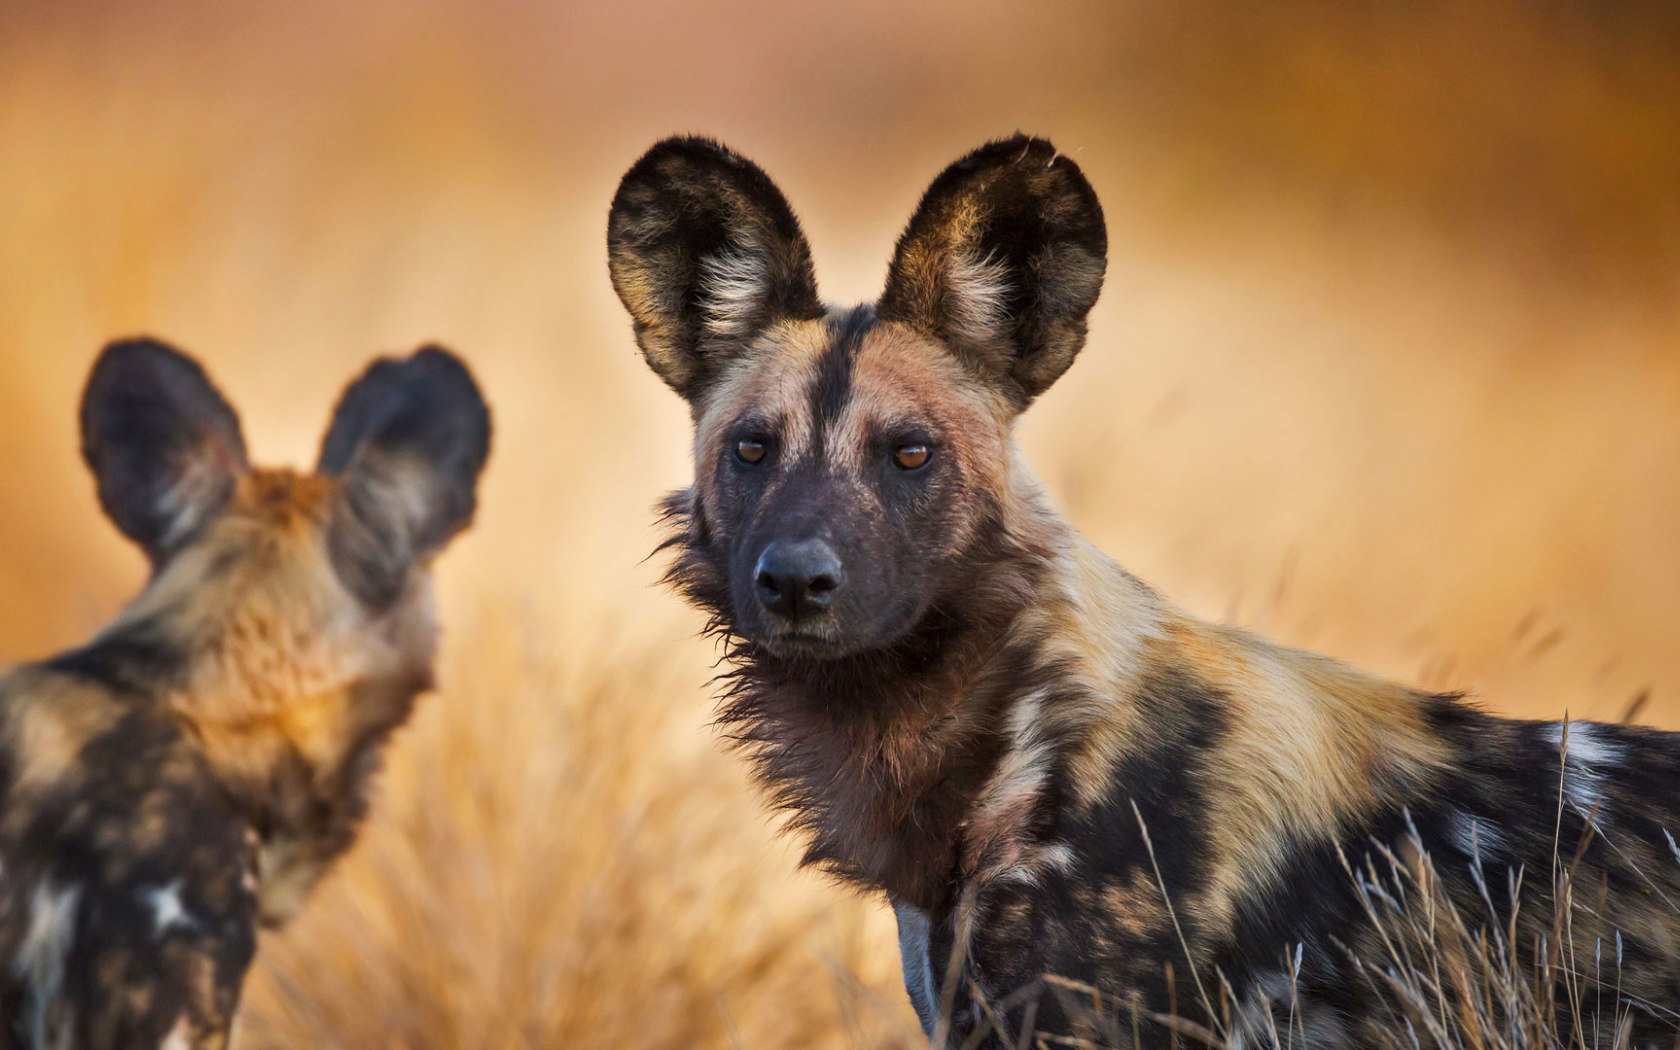 Two hyena-shaped dogs with large ears